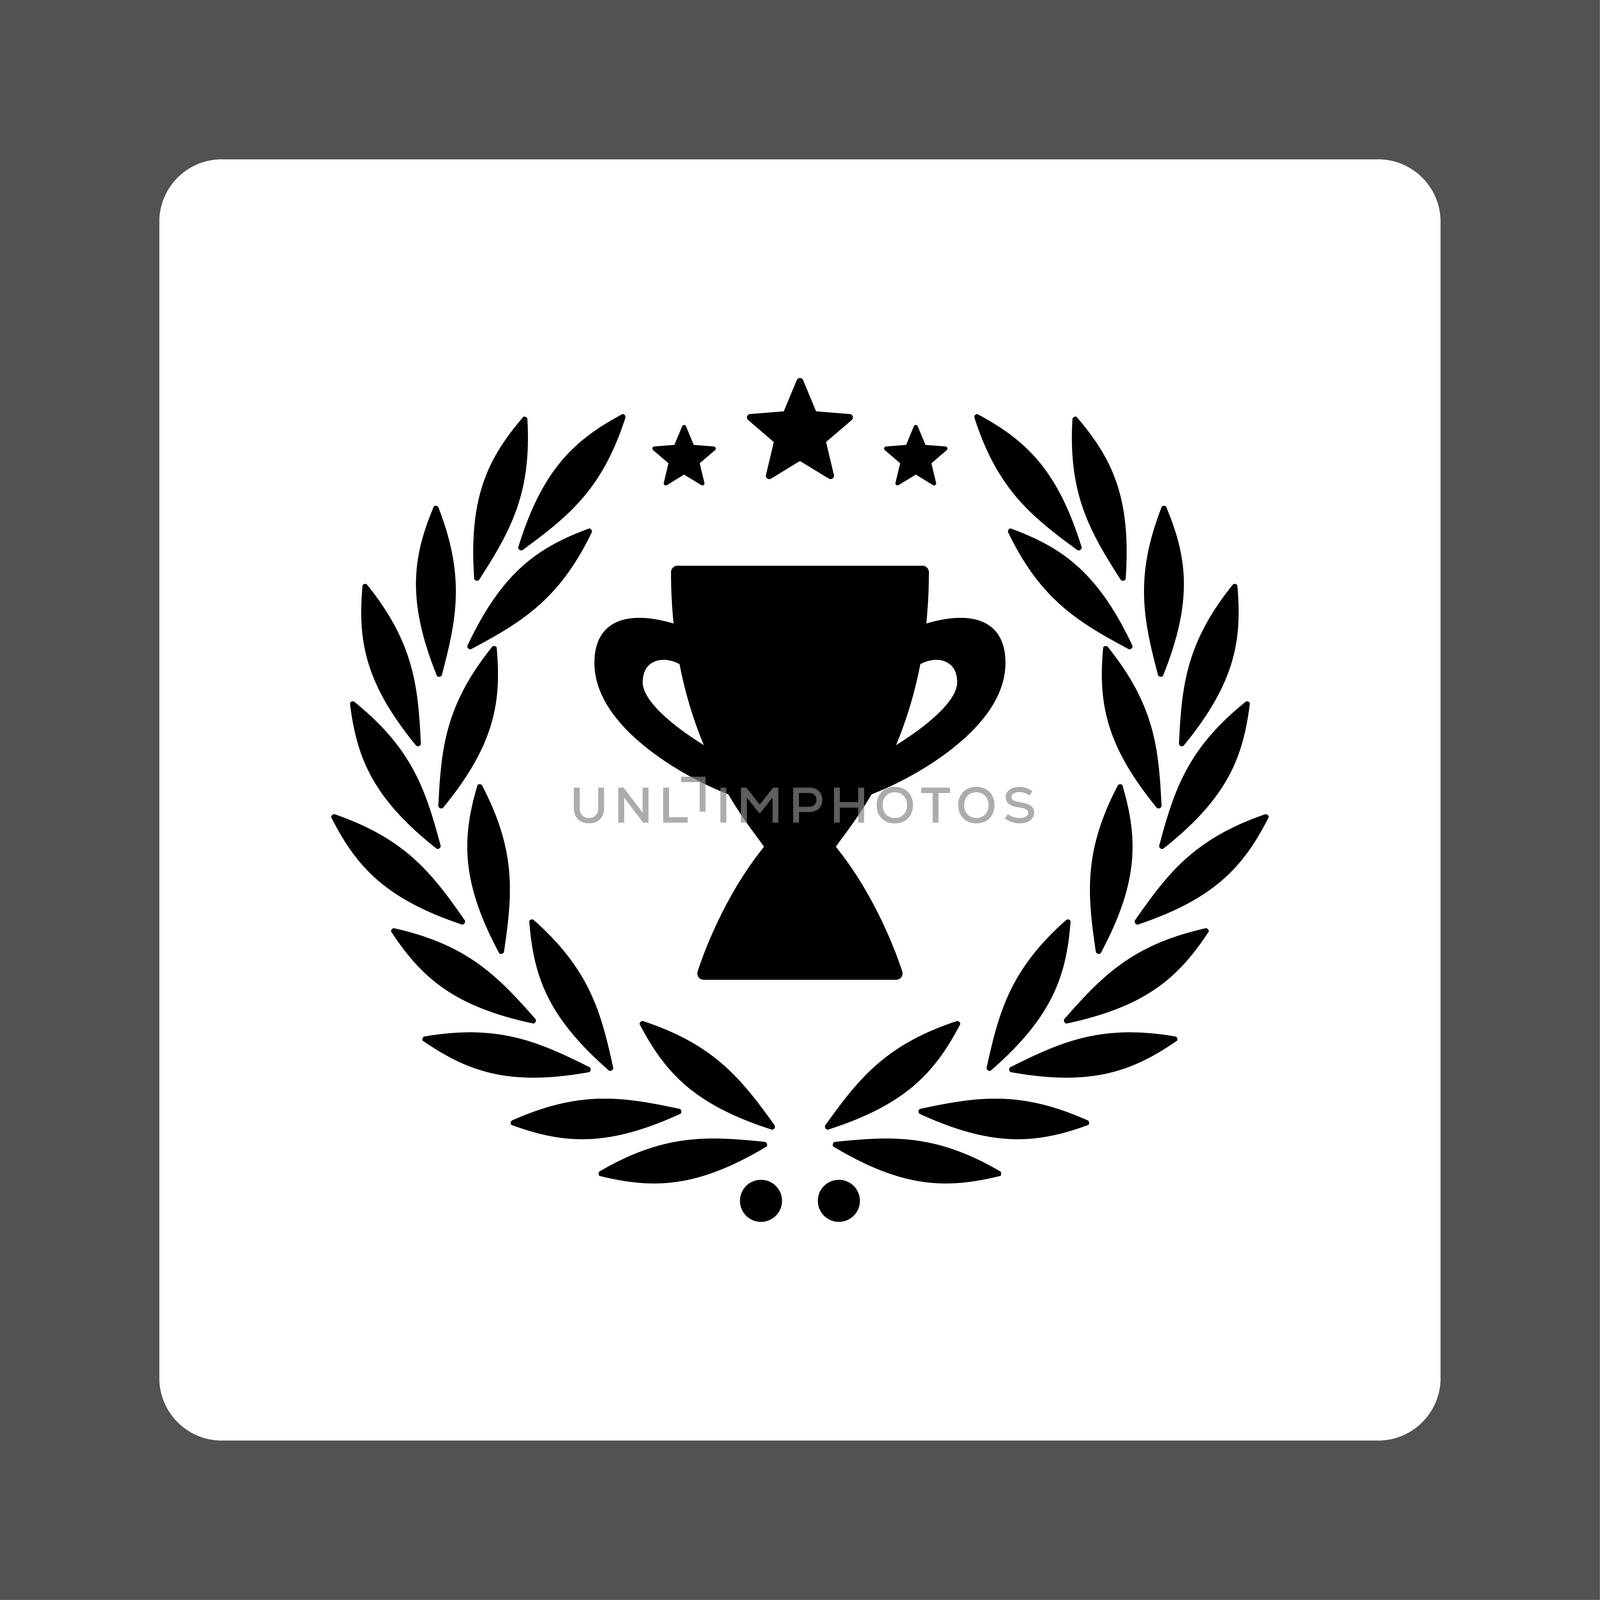 Glory icon from Award Buttons OverColor Set. Icon style is black and white colors, flat rounded square button, gray background.